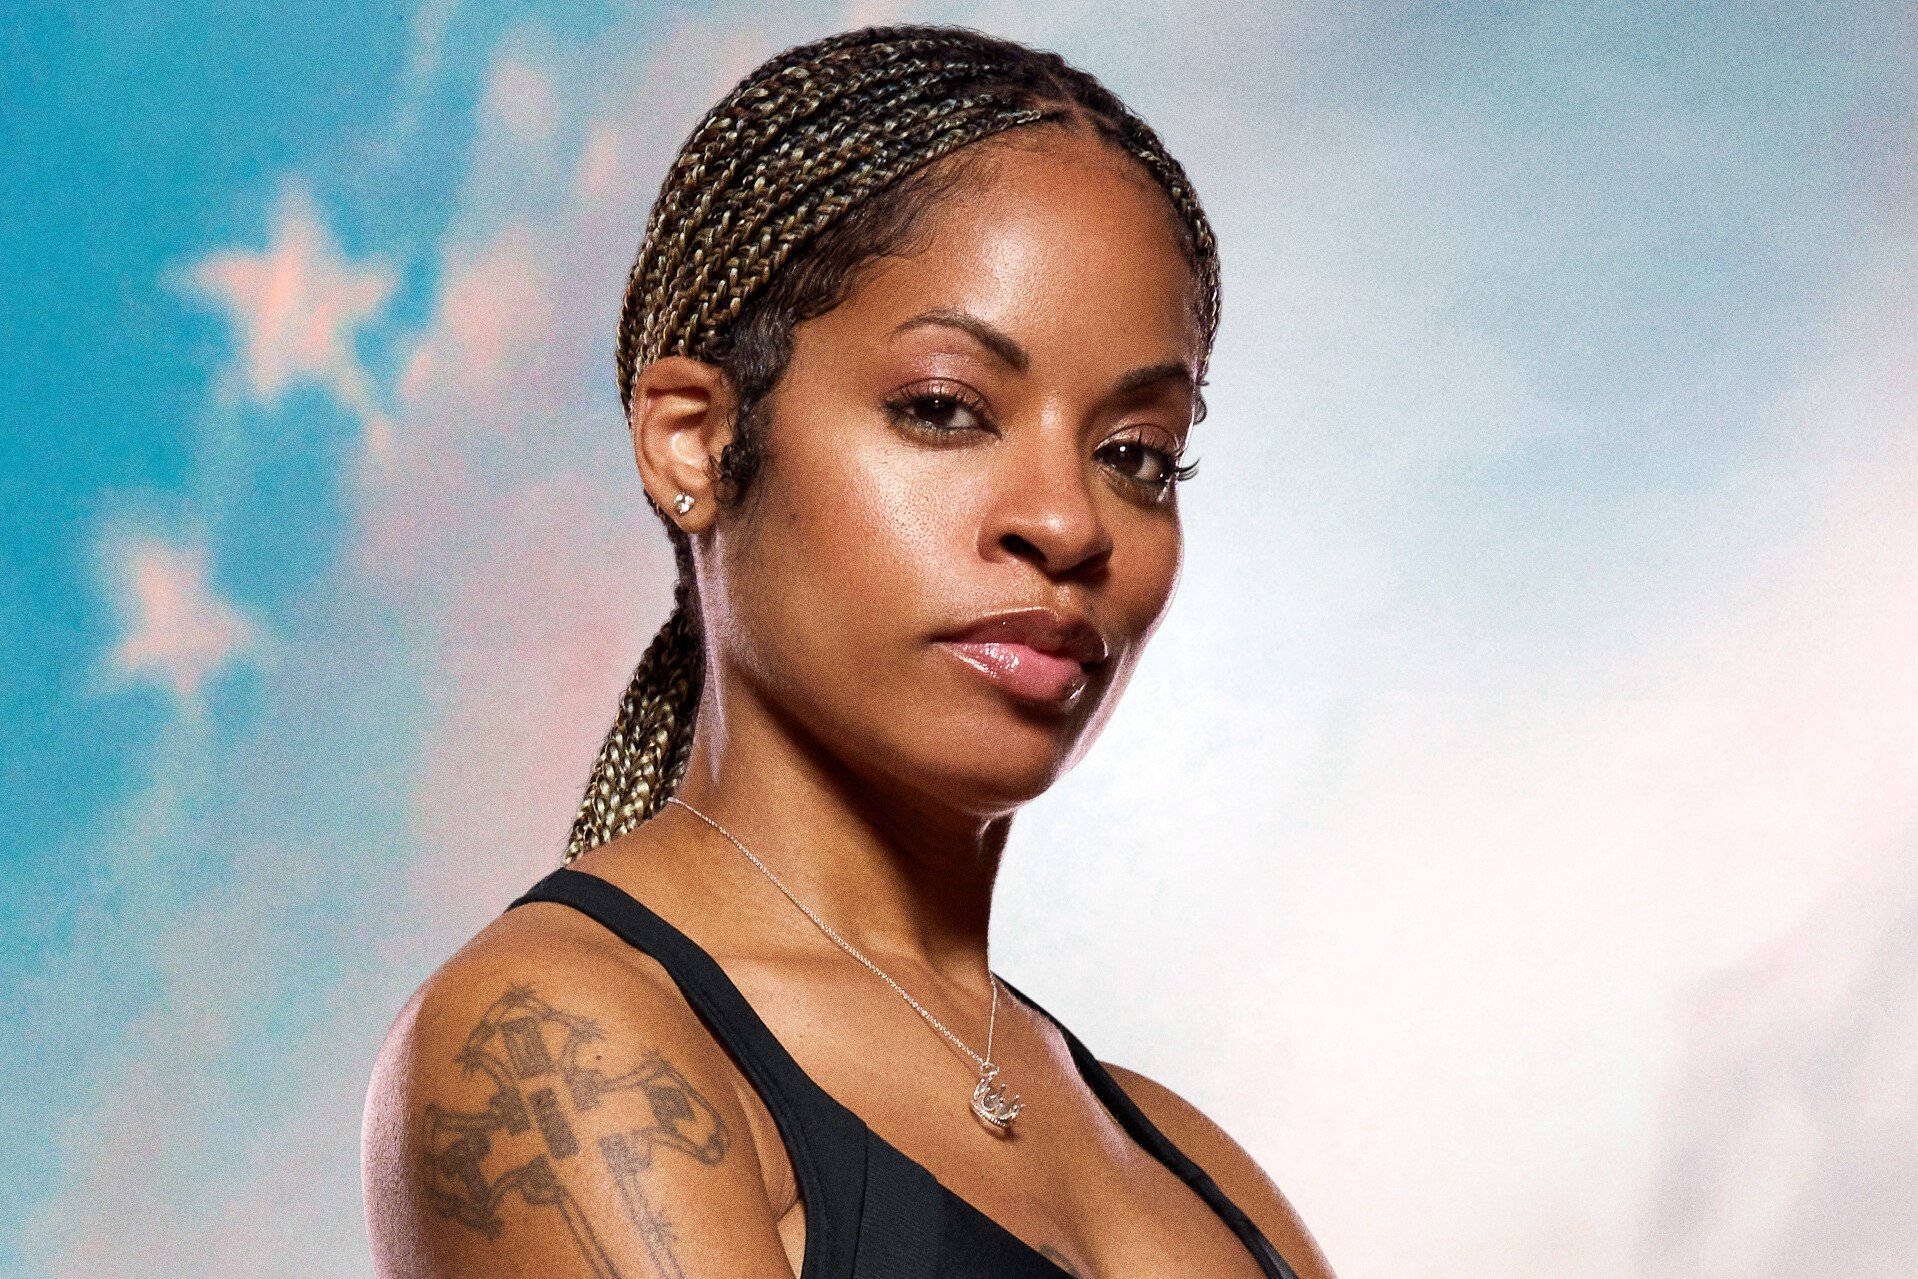 Tiffany Mitchell, a contestant on 'The Challenge: USA,' poses for promotional pictures for the show. She wears a black tank top.